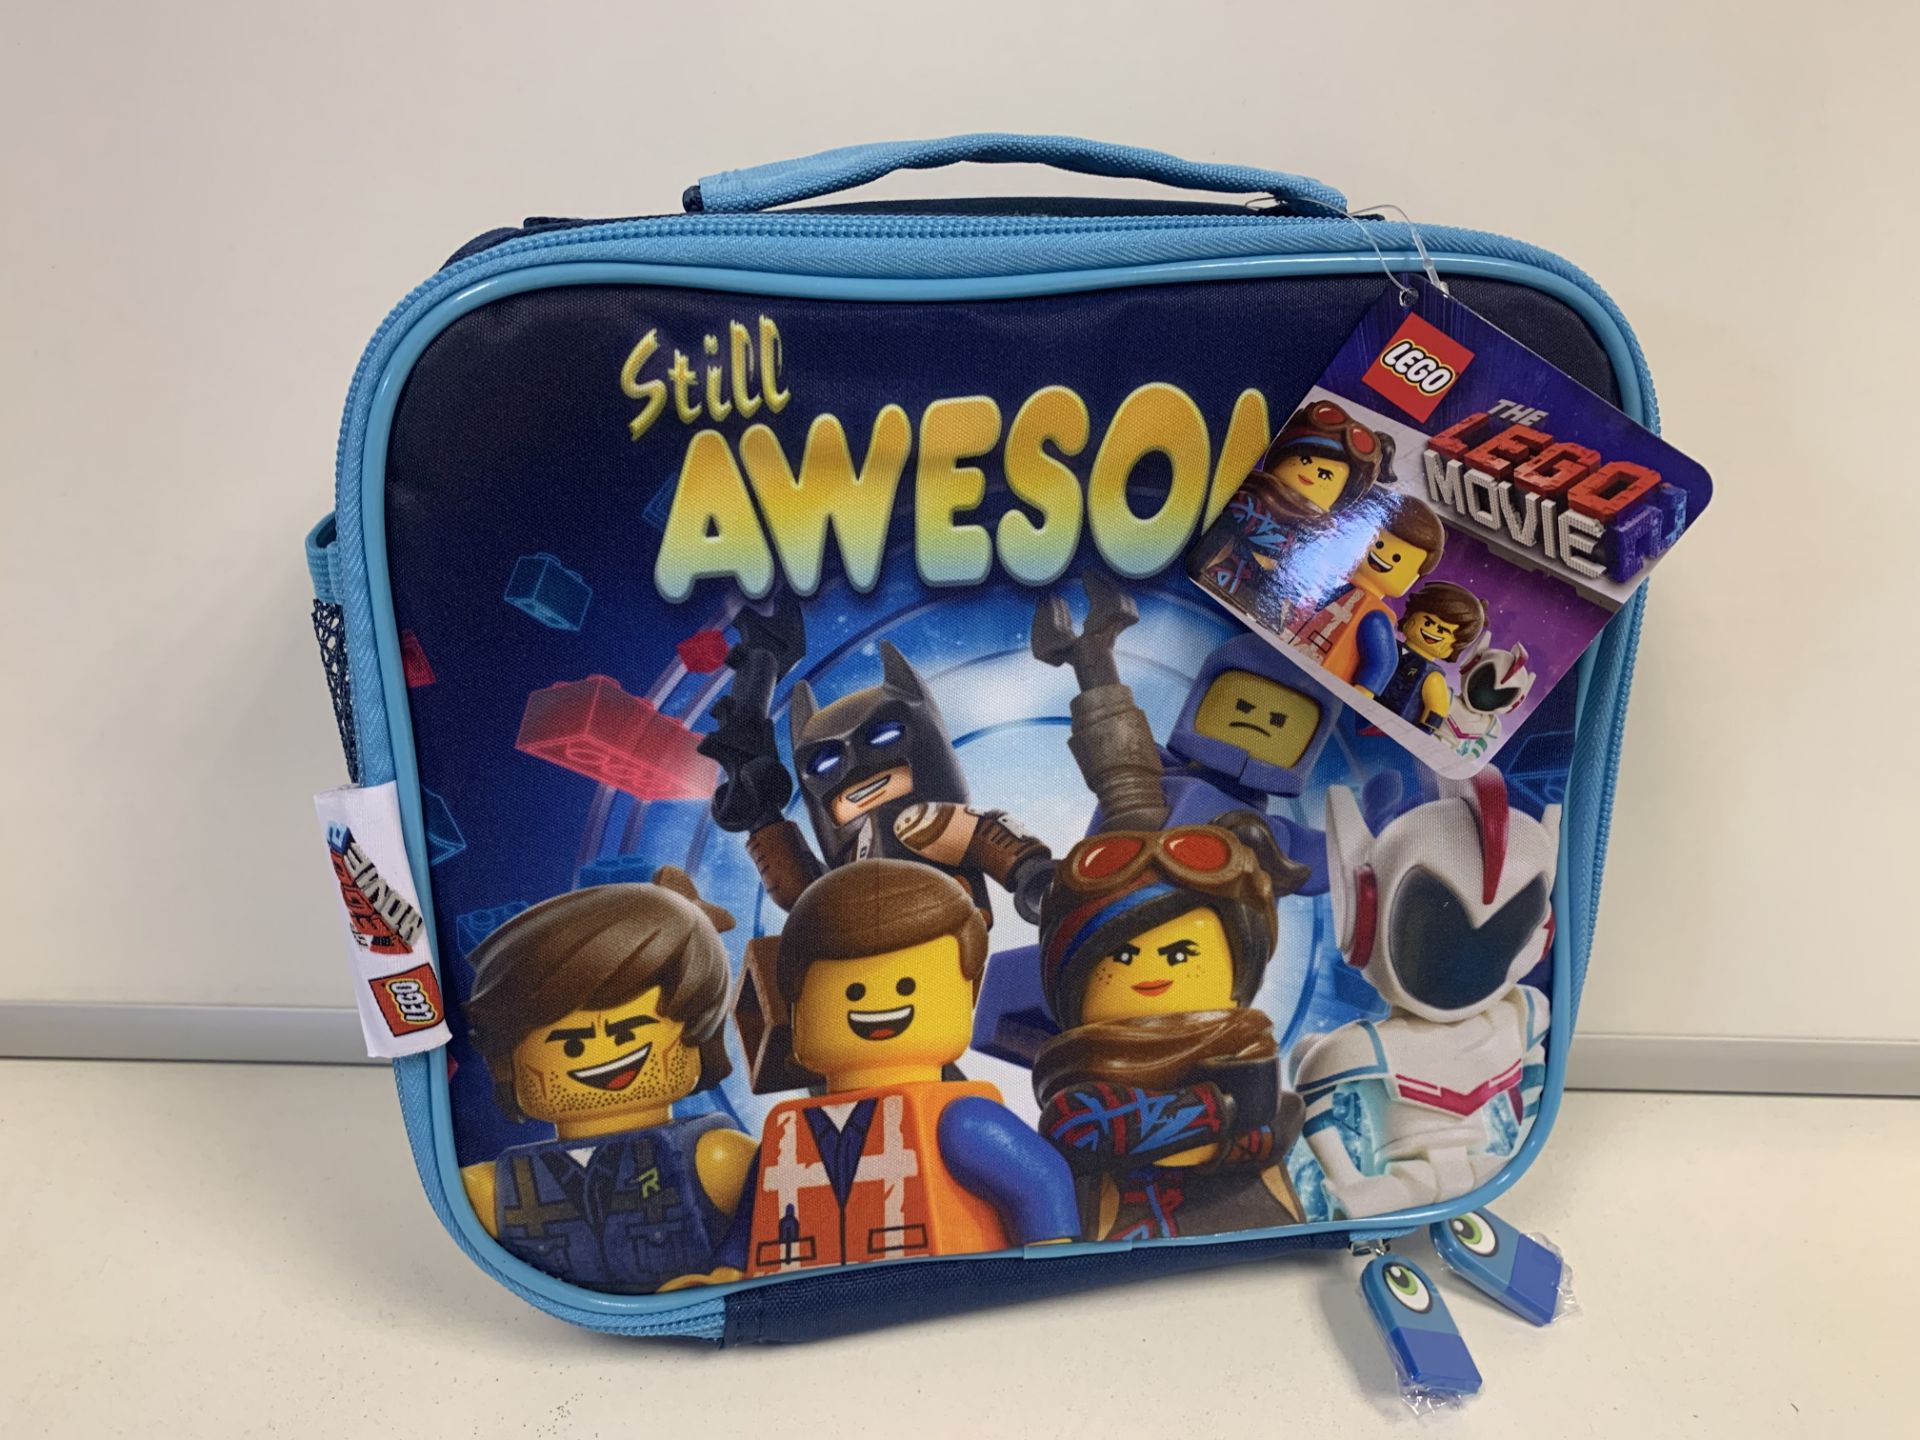 28 X BRAND NEW BOXED LEGO MOVIE 2 LUNCH BAGS BLUE IN 6 BOXES